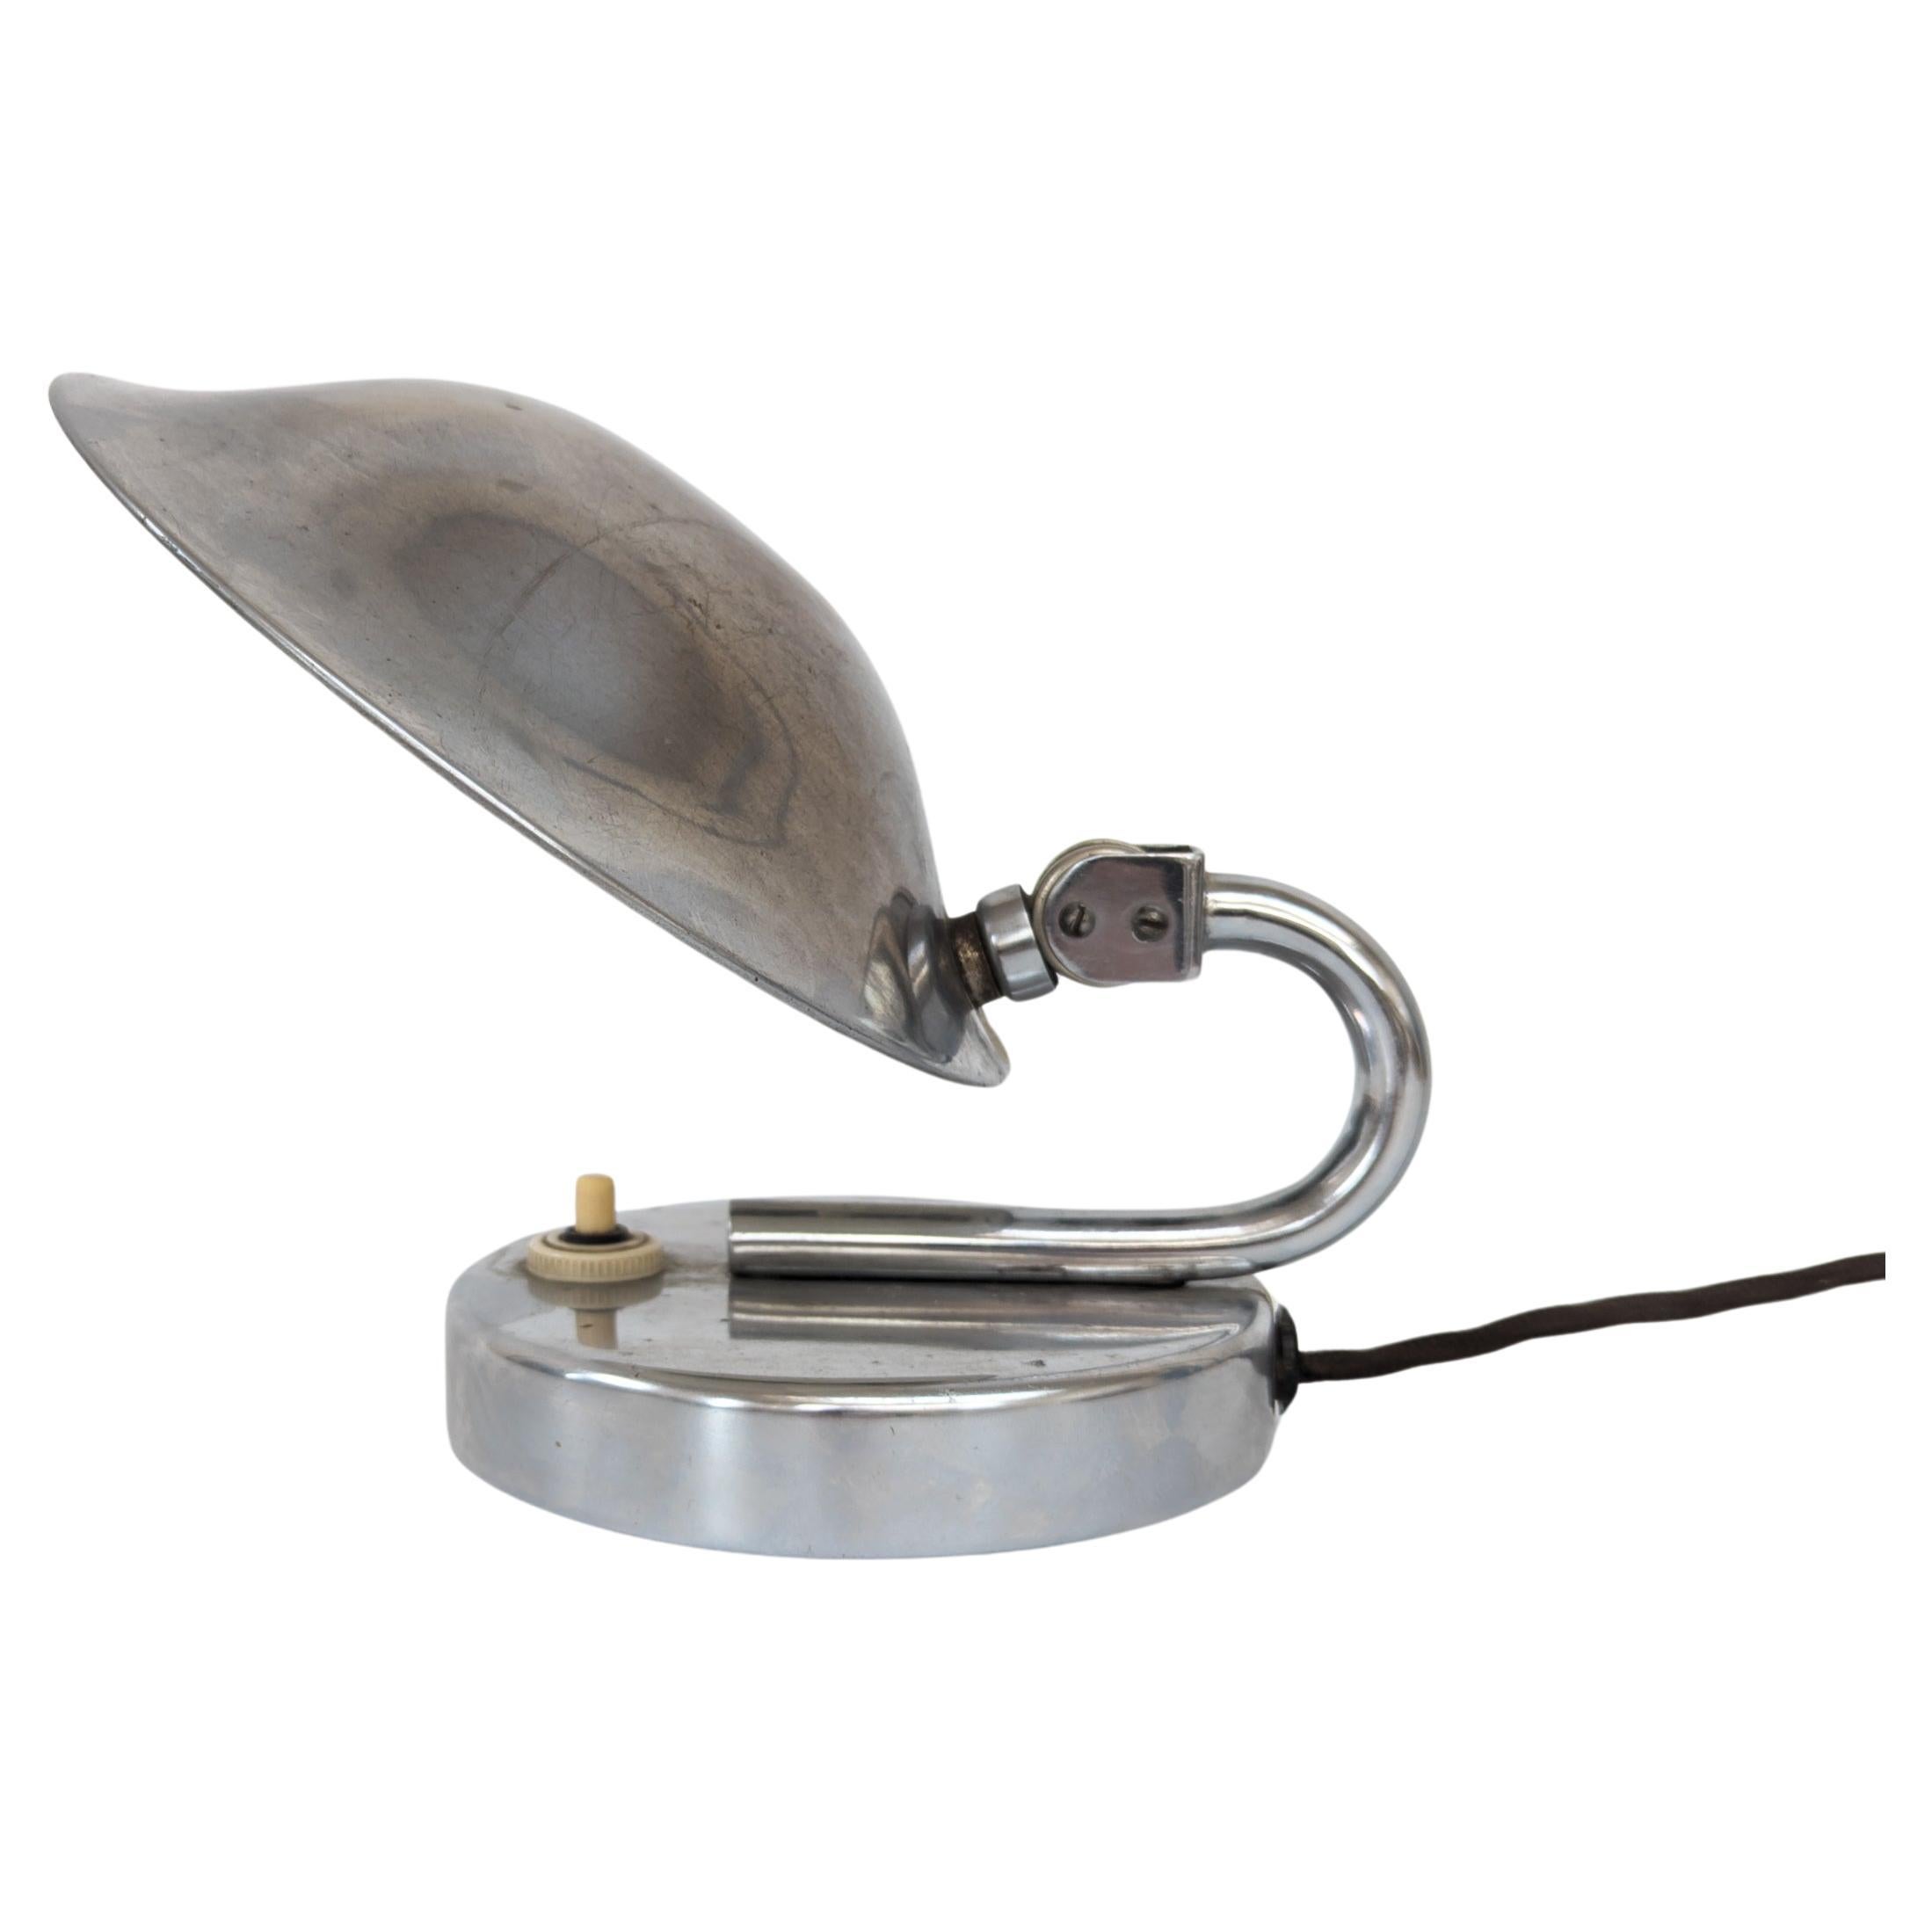 Art Deco Oyster lamp by Josef Hůrka for Napako, 1930s